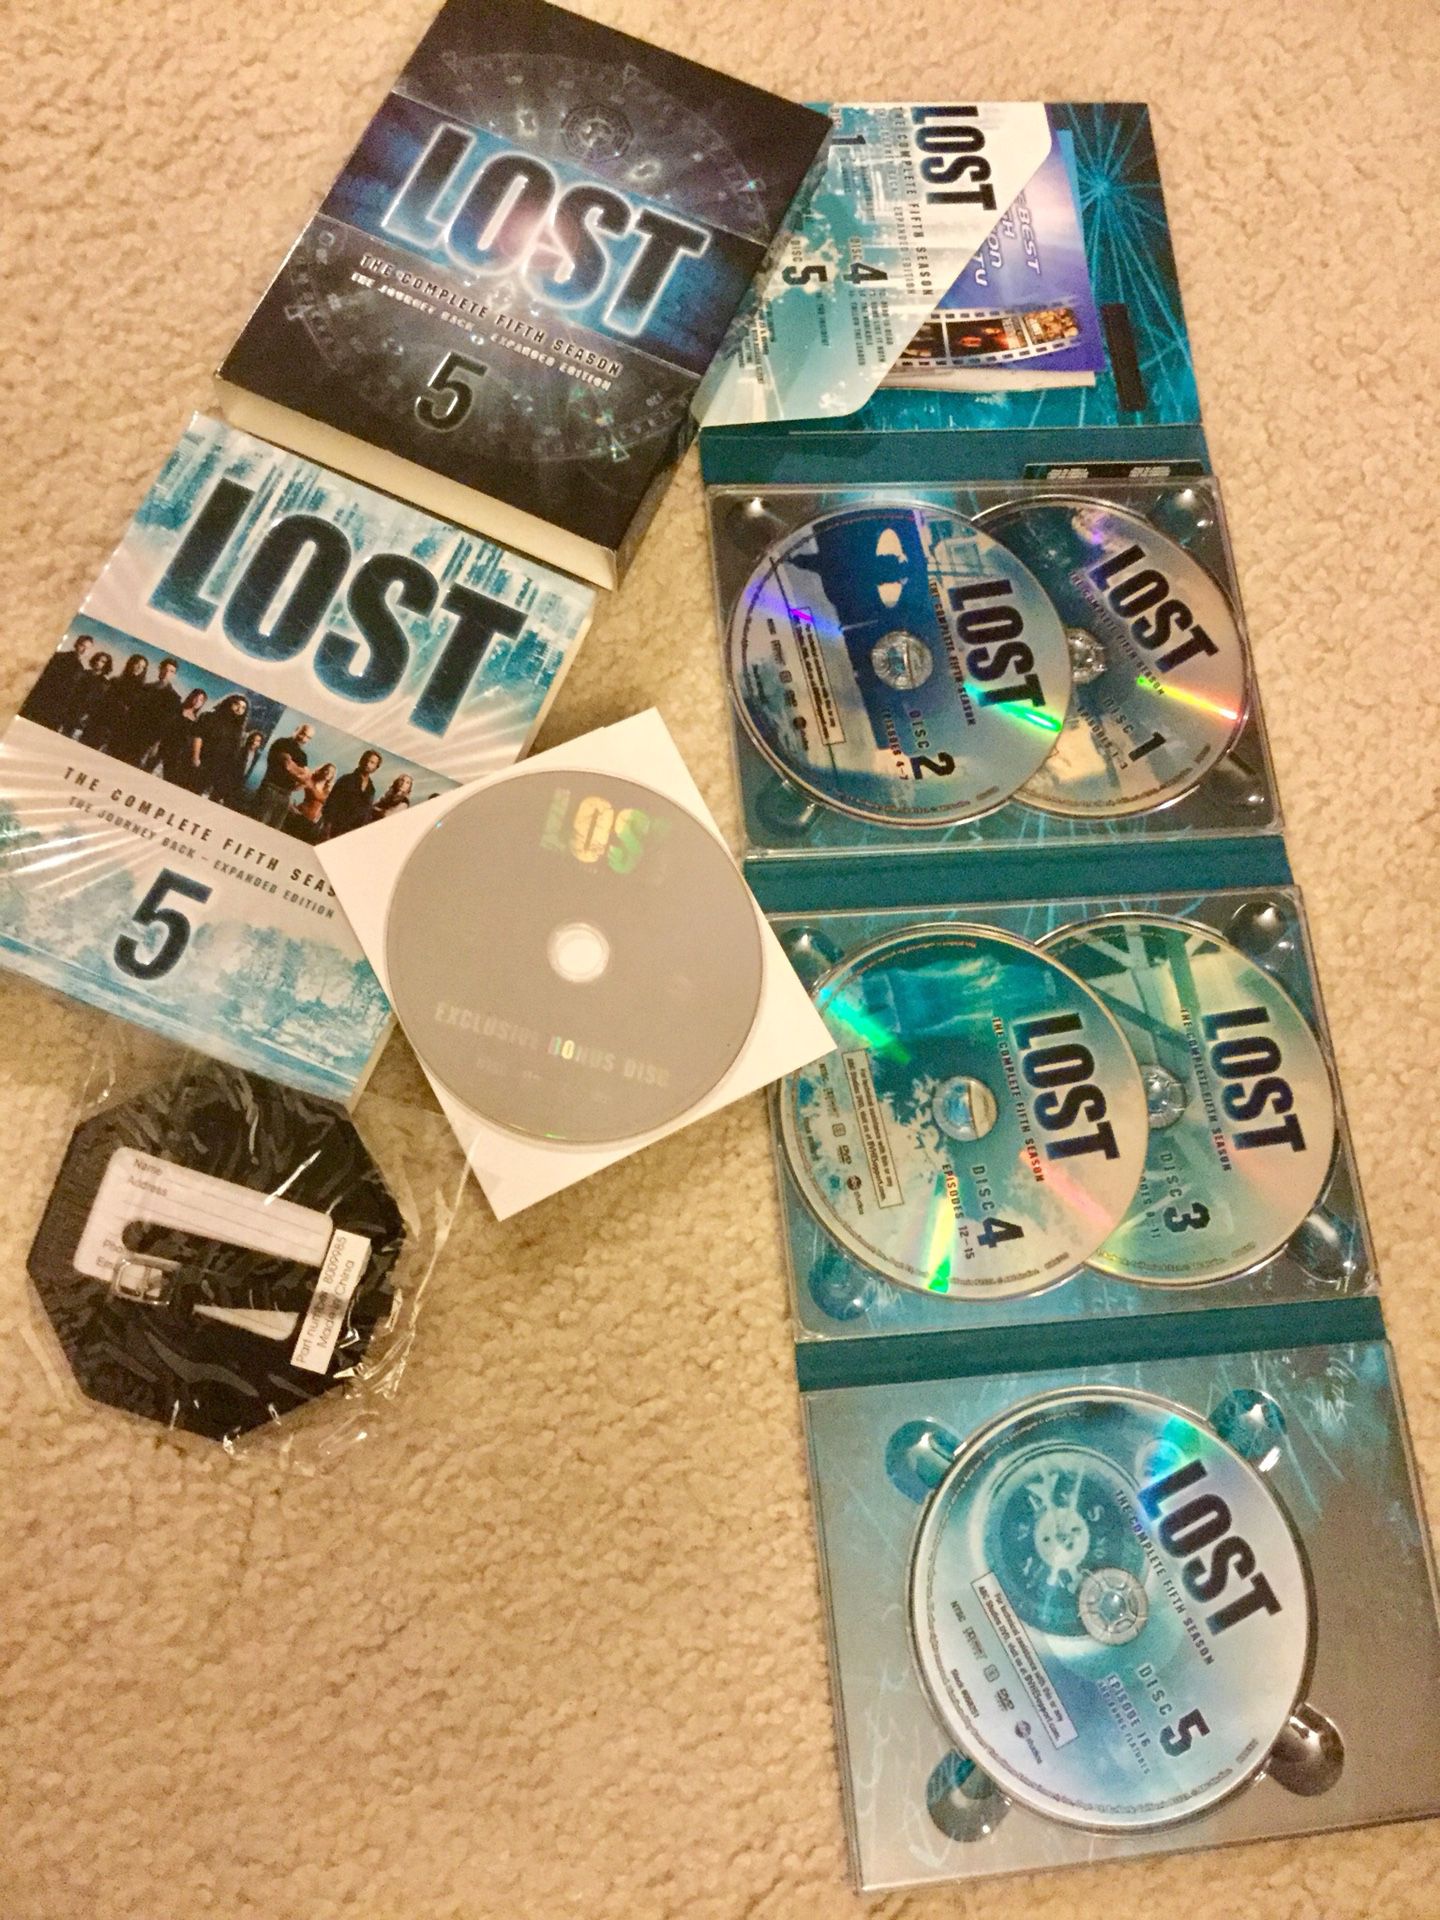 LOST 5 / The Complete Fifth Season * The Journey back - expended edition + Bonus DVD 📀📀😁🍿🎥